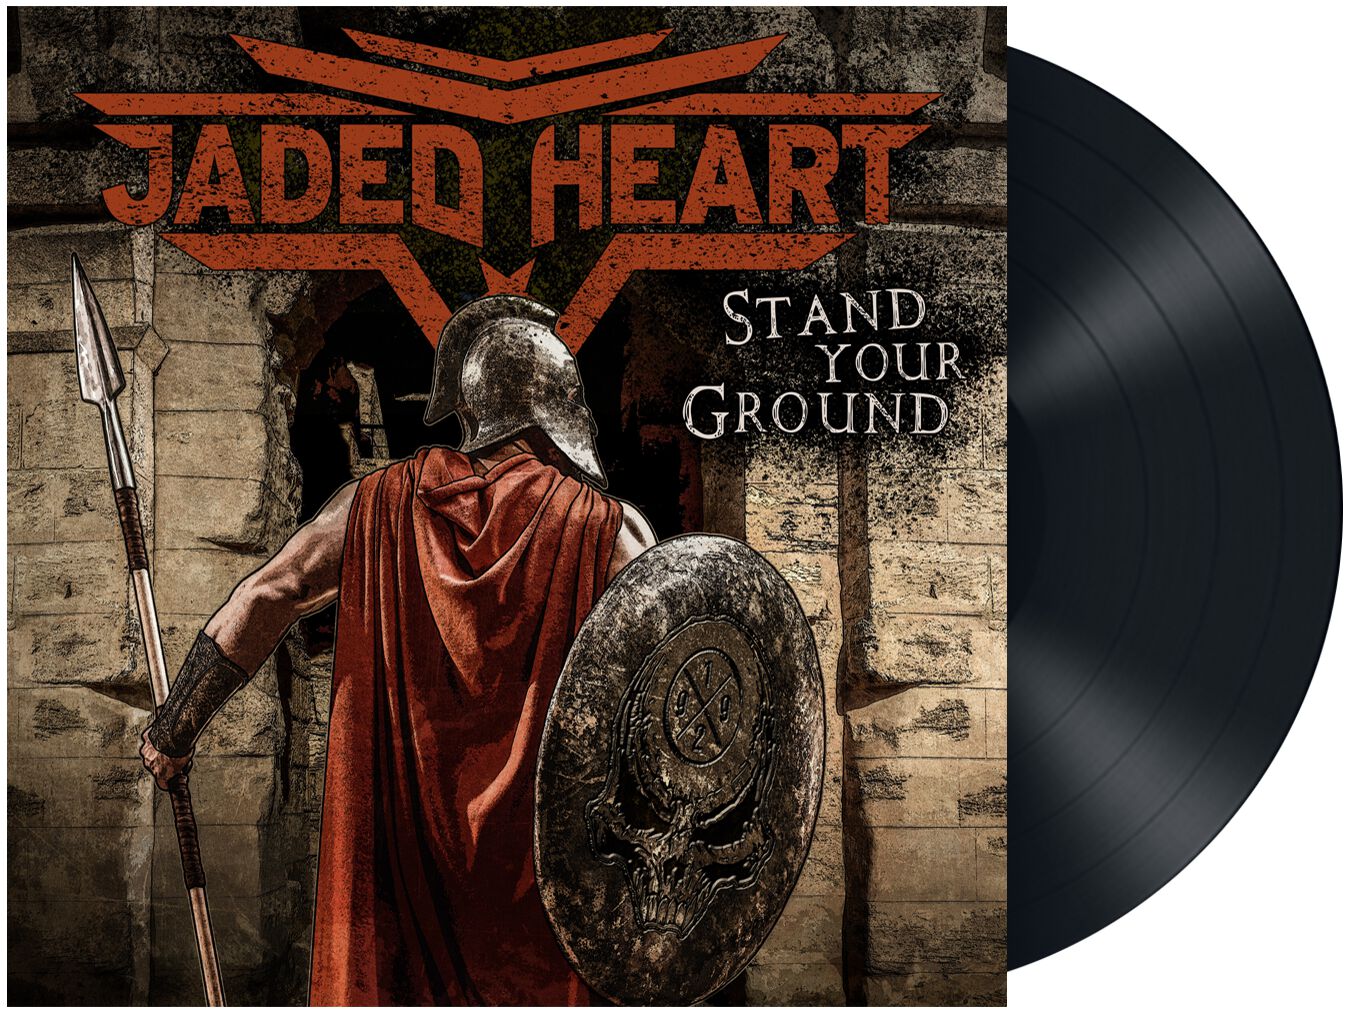 Image of Jaded Heart Stand your ground LP Standard